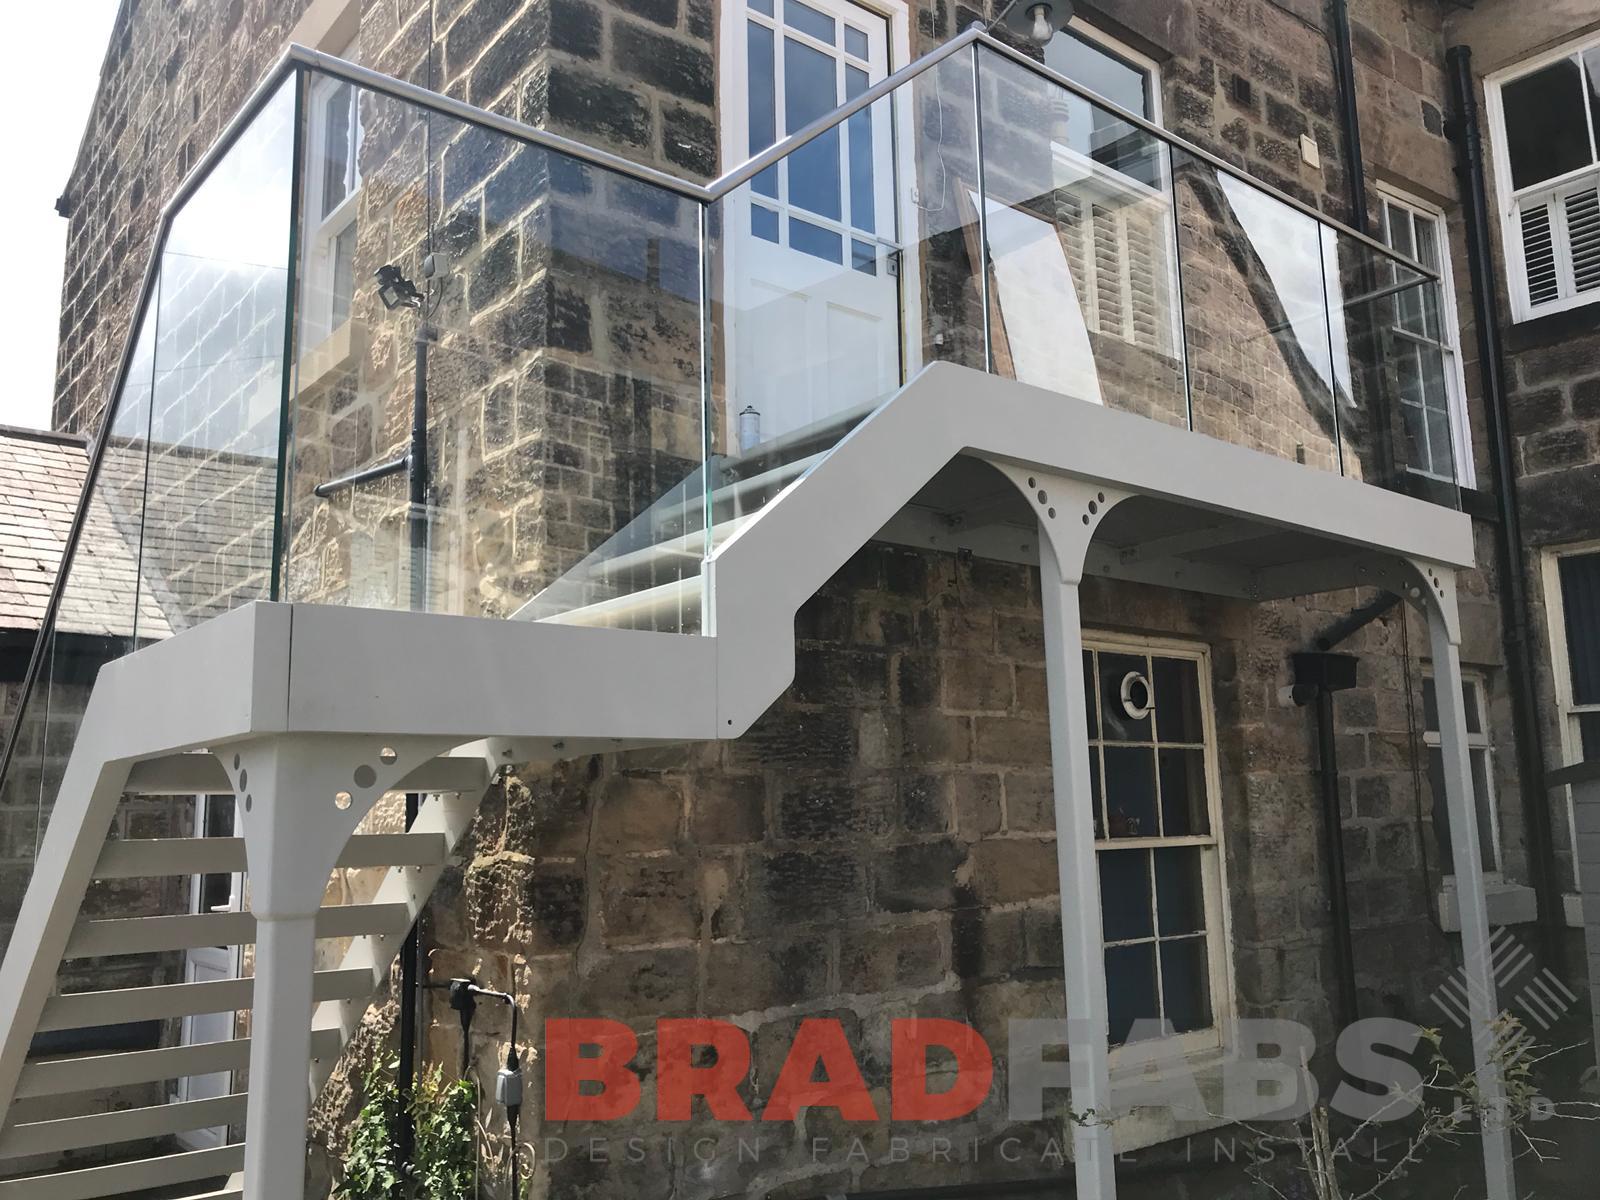 Contemporary Glass Balustrade Access Staircase Designed, fabricated and installed by Bradfabs